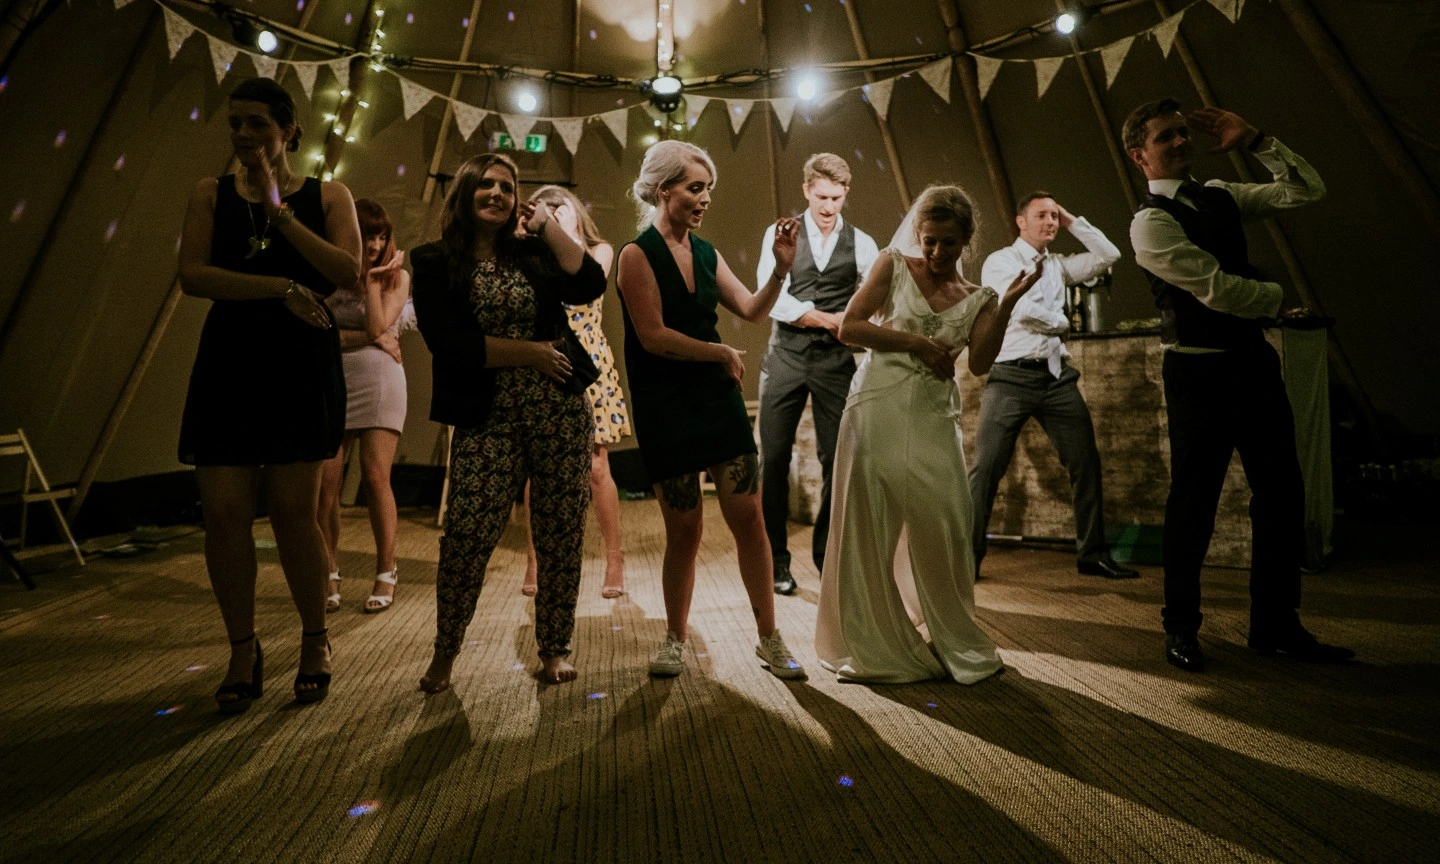 wedding guests and bride on the dance floor. Photo by Mitchell Orr via unsplash